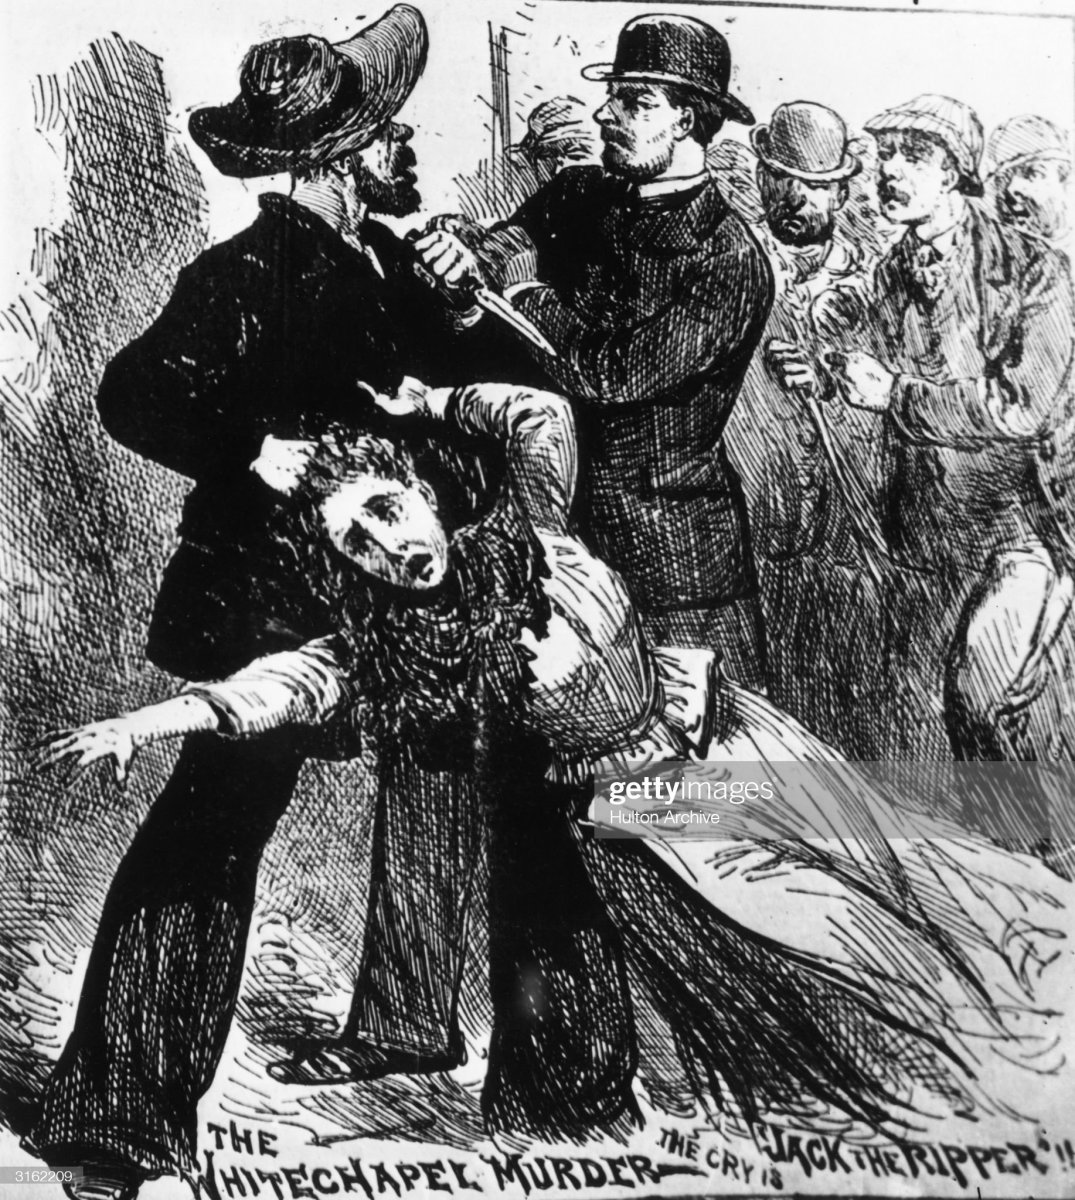 Sadly, "Jack the Ripper" was never properly identified or caught